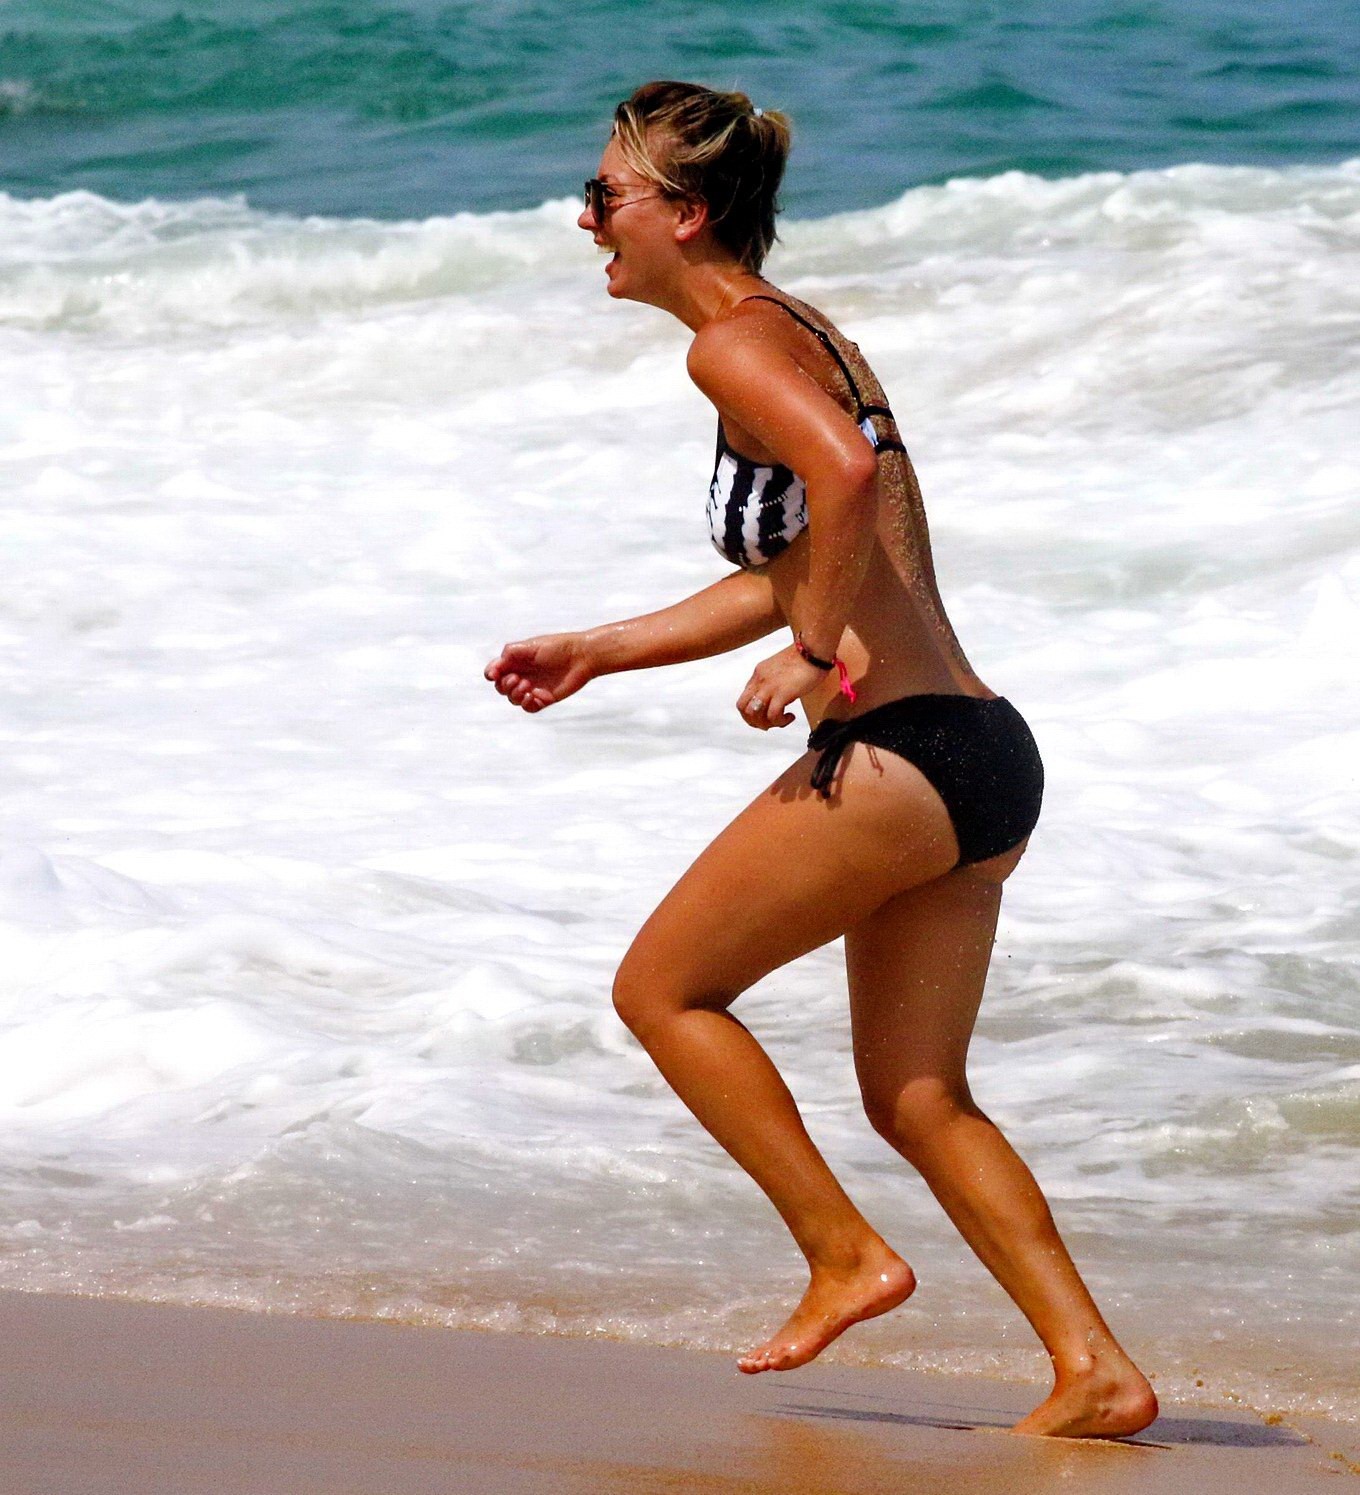 Kaley Cuoco shows off her ass wearing a monochrome bikini on a beach in Mexico #75191878